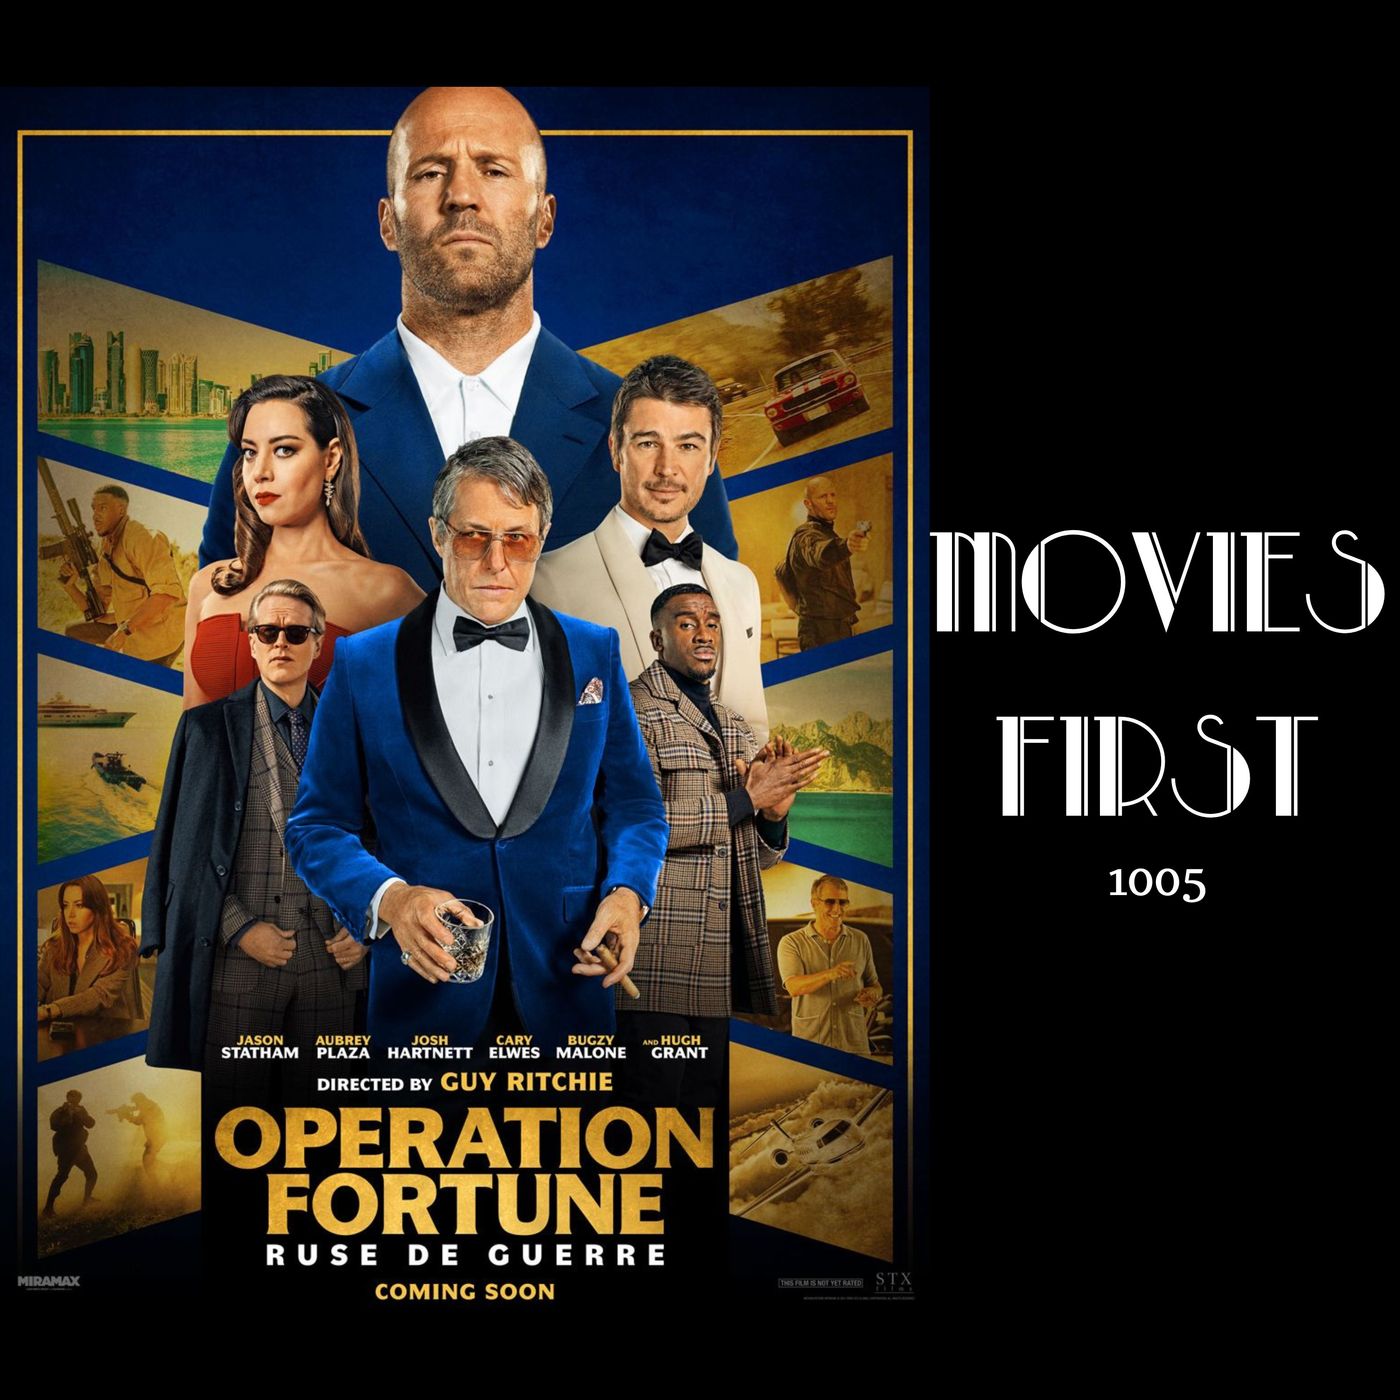 1005: Operation Fortune: Ruse de guerre (Action, Comedy, Thriller) (review) Image